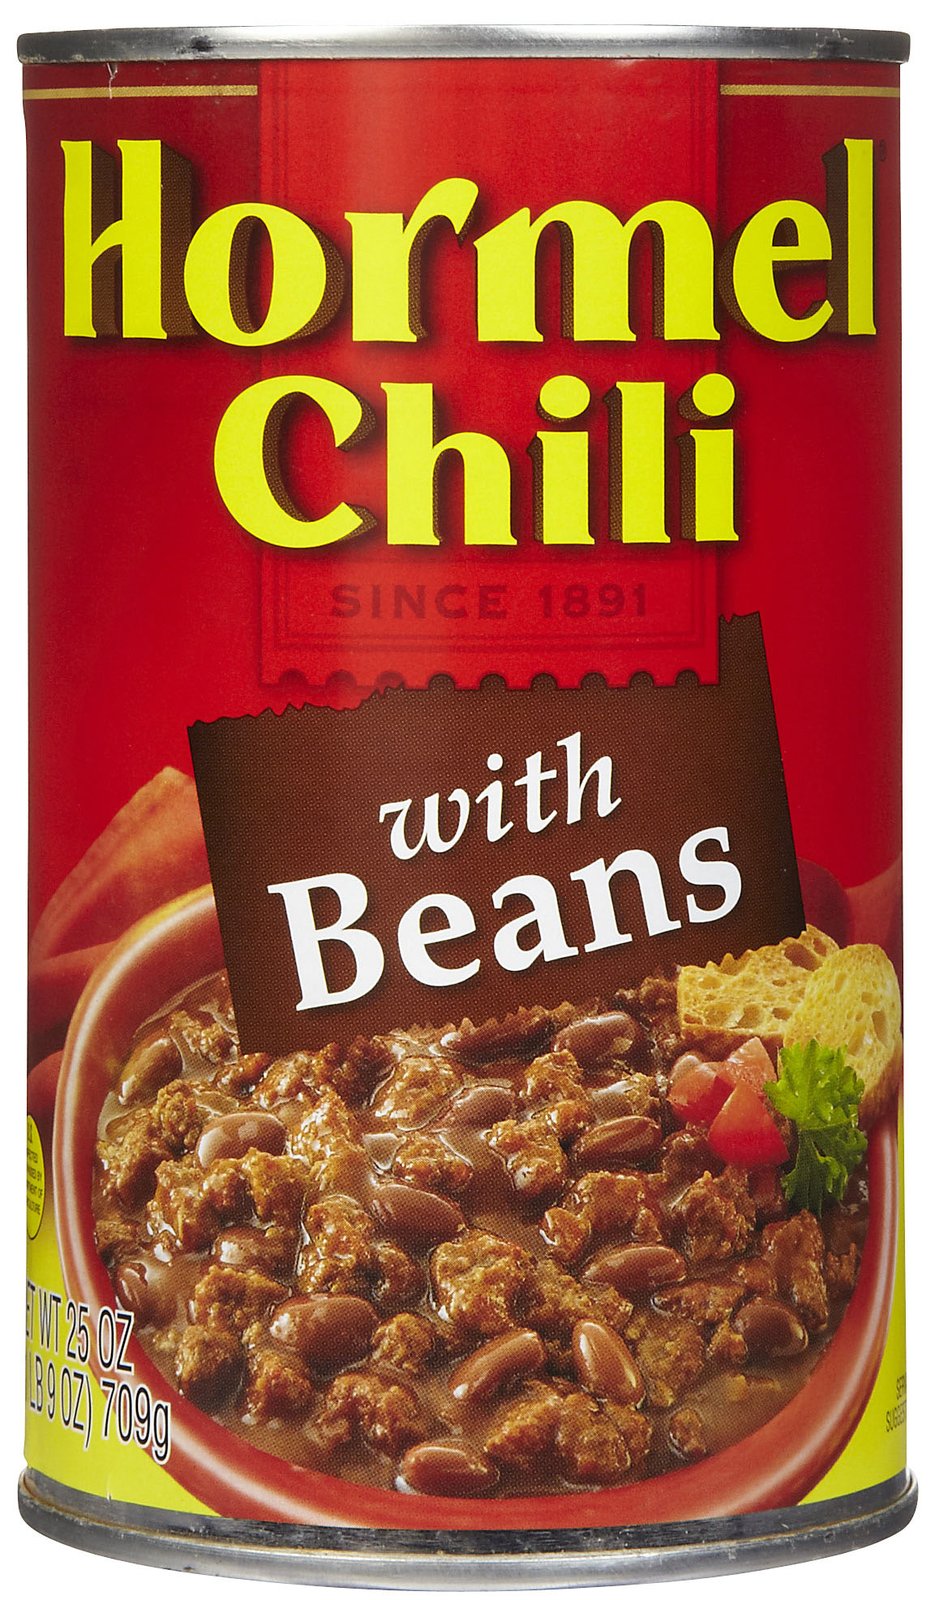 Hormel Chili As Low As $1.23 at Pubix